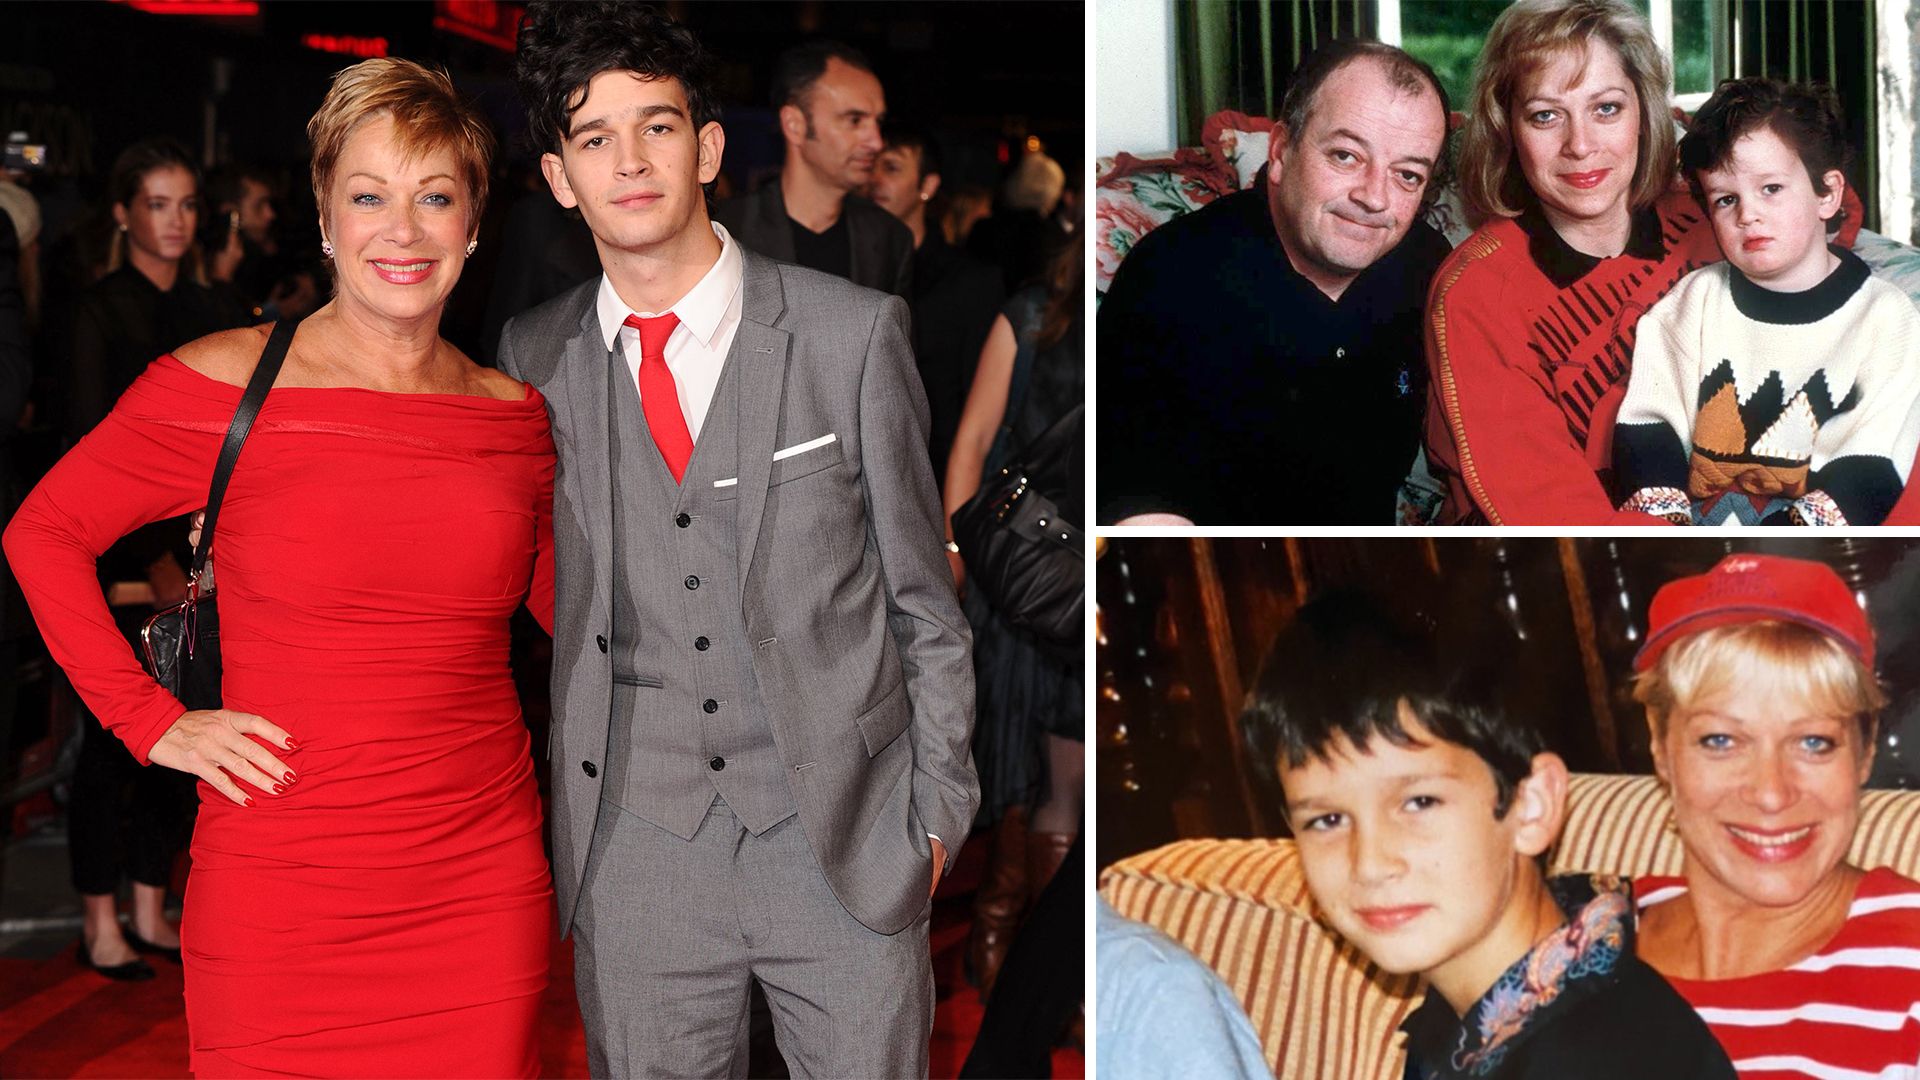 Denise Welch and Matty Healy throughout the years